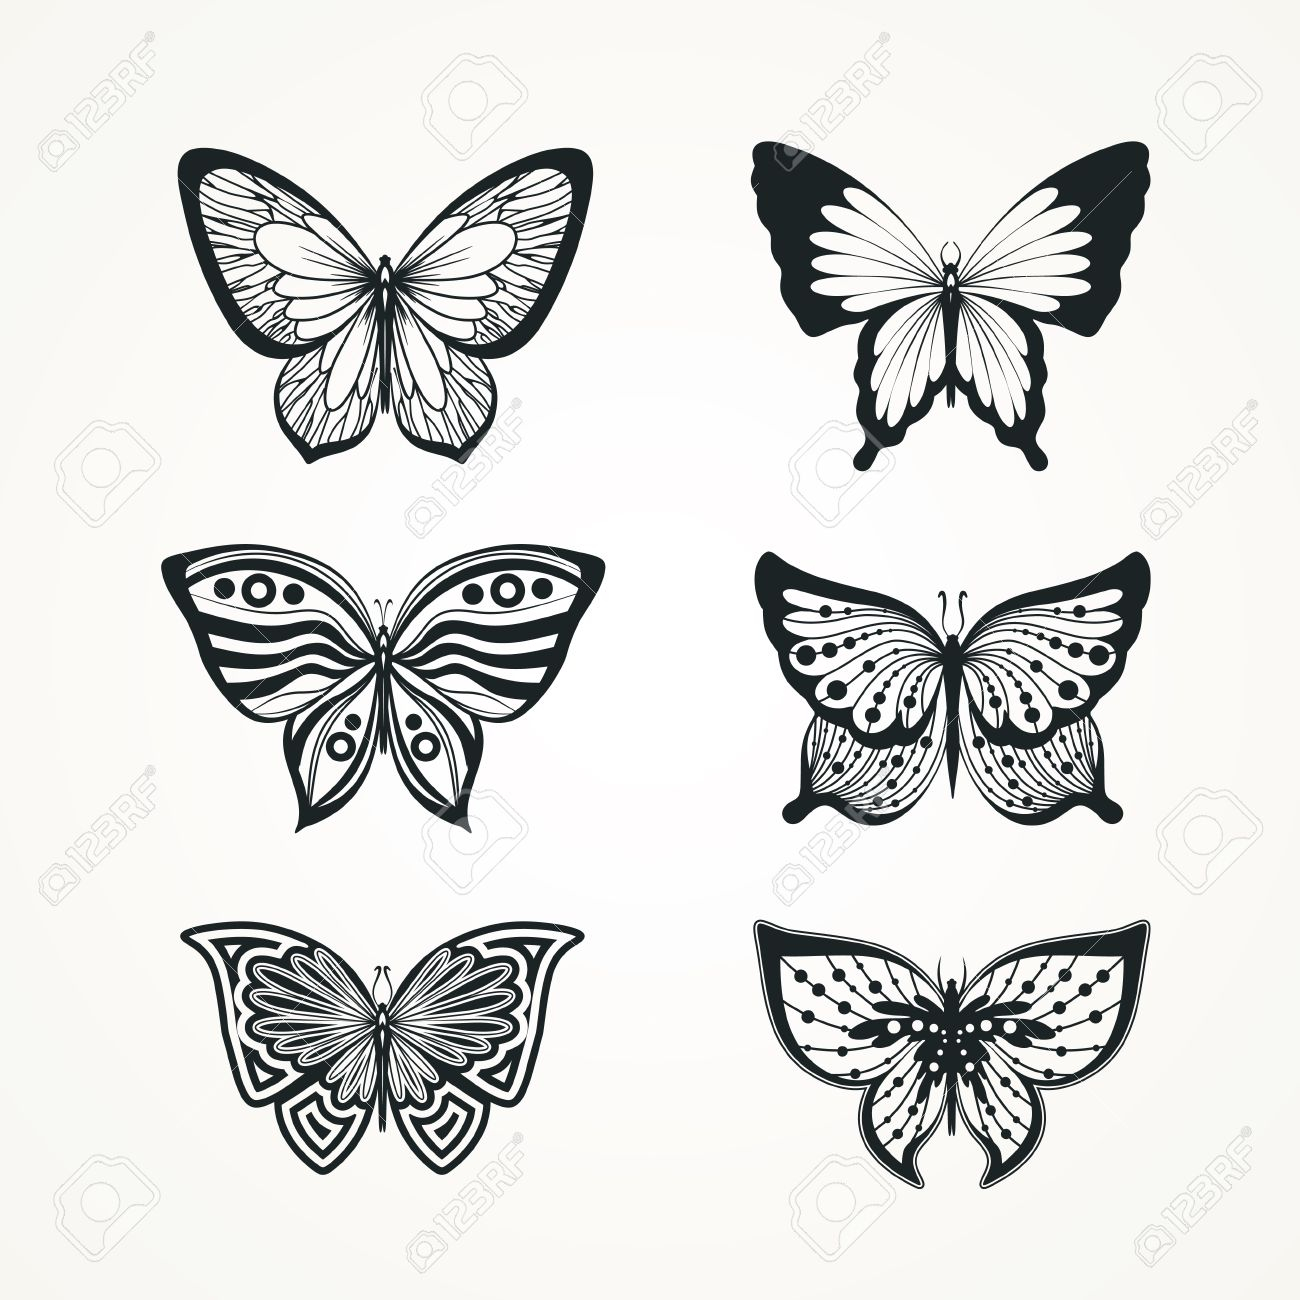 Collection Of Stylized Butterfly Tattoo Royalty Free Cliparts in size 1300 X 1300